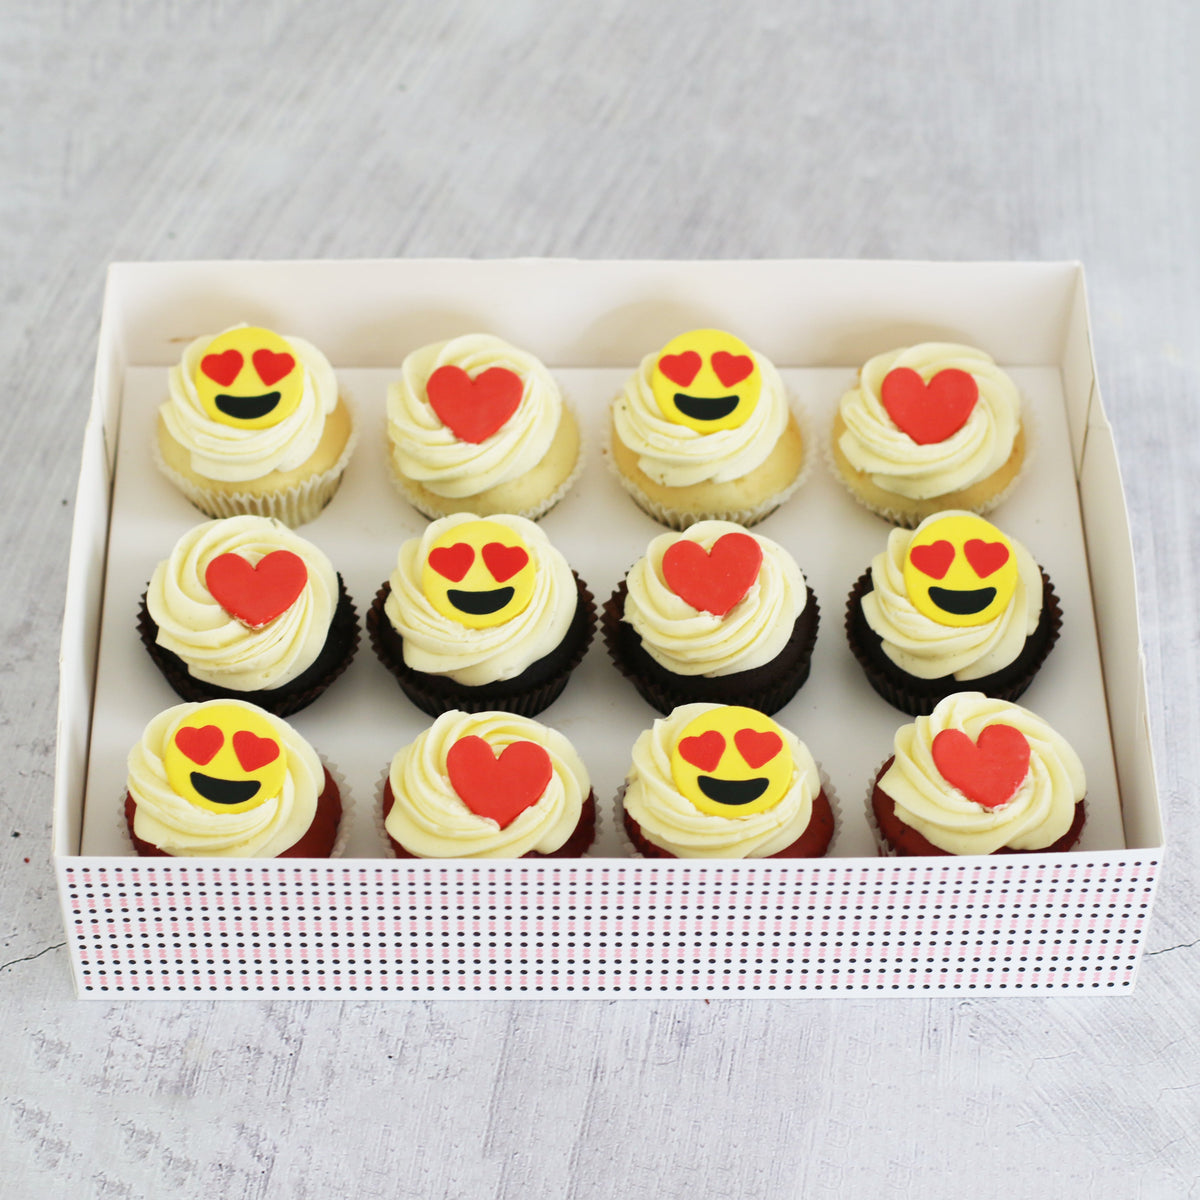 Big Heart Emoji Gift Box Cupcakes Pre Selected Boxes The Cupcake Queens 